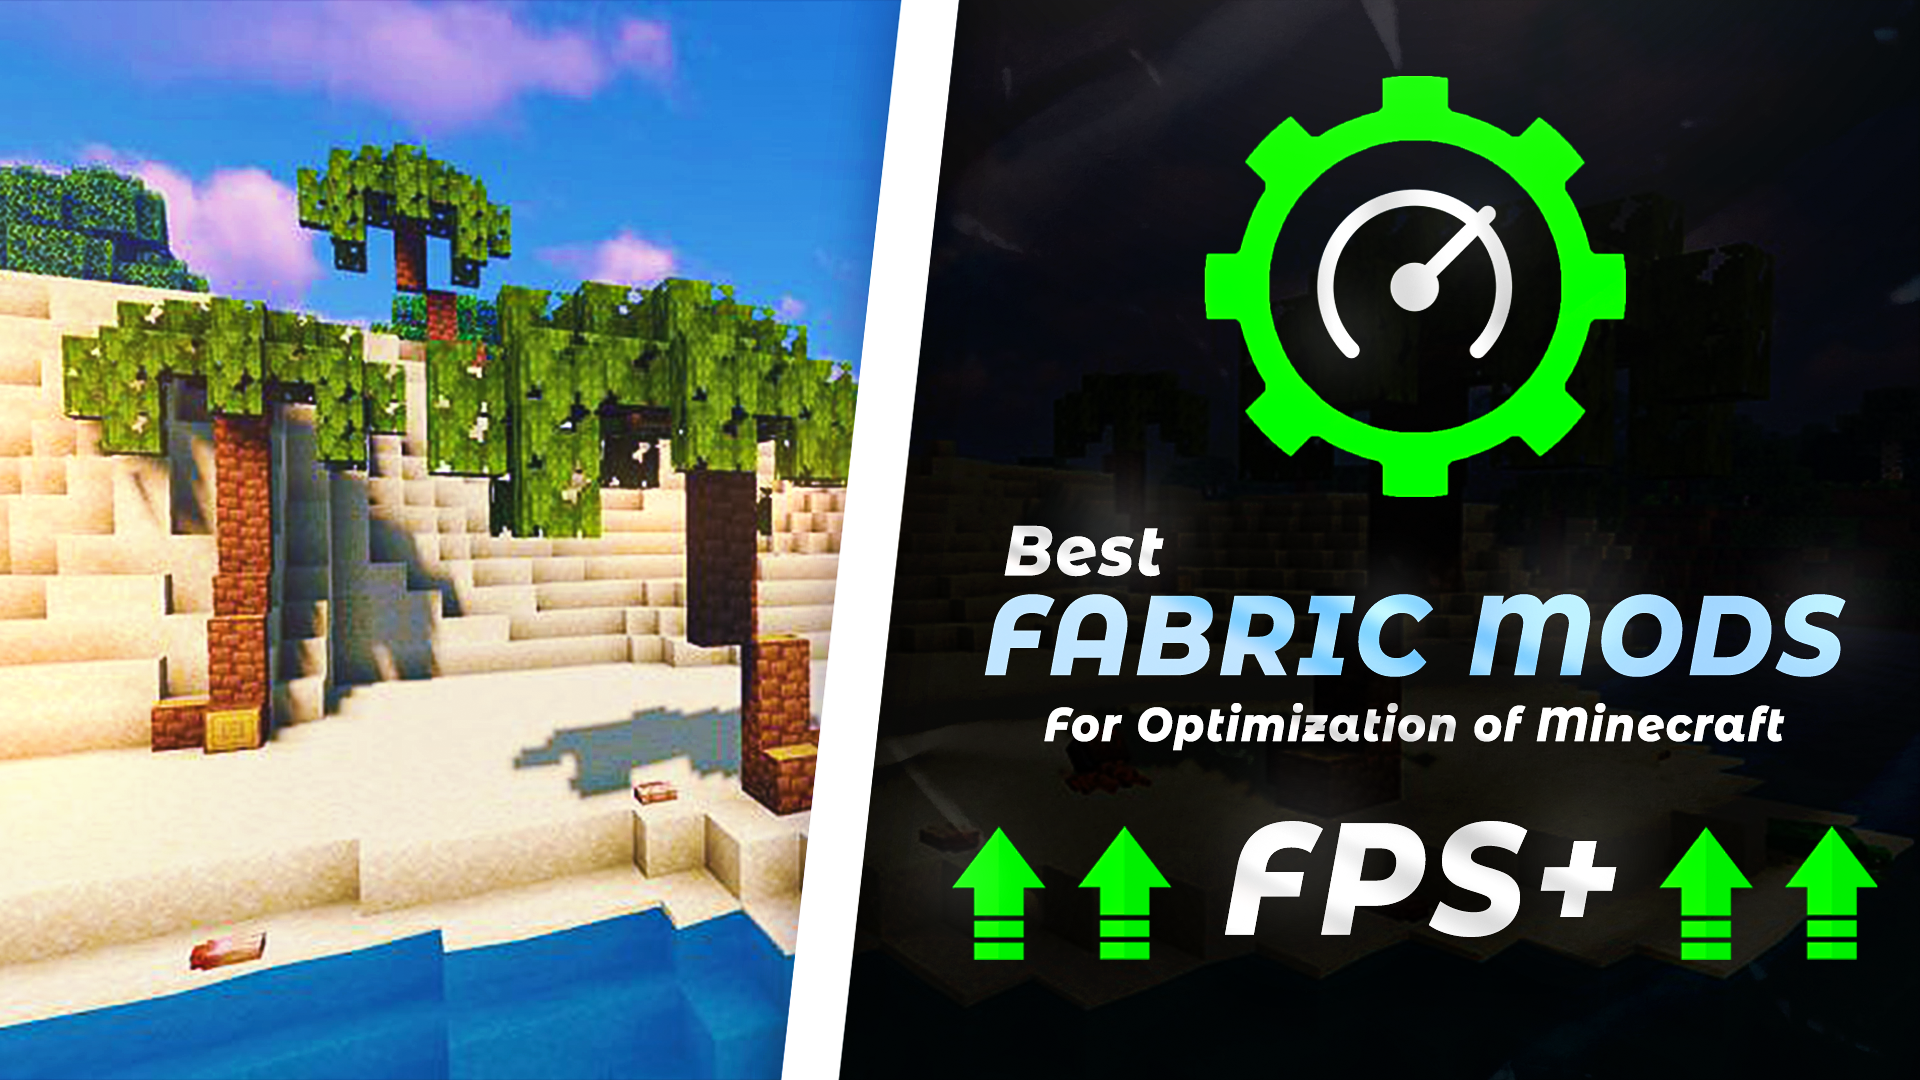 Best Fabric Mods For Optimization of Minecraft